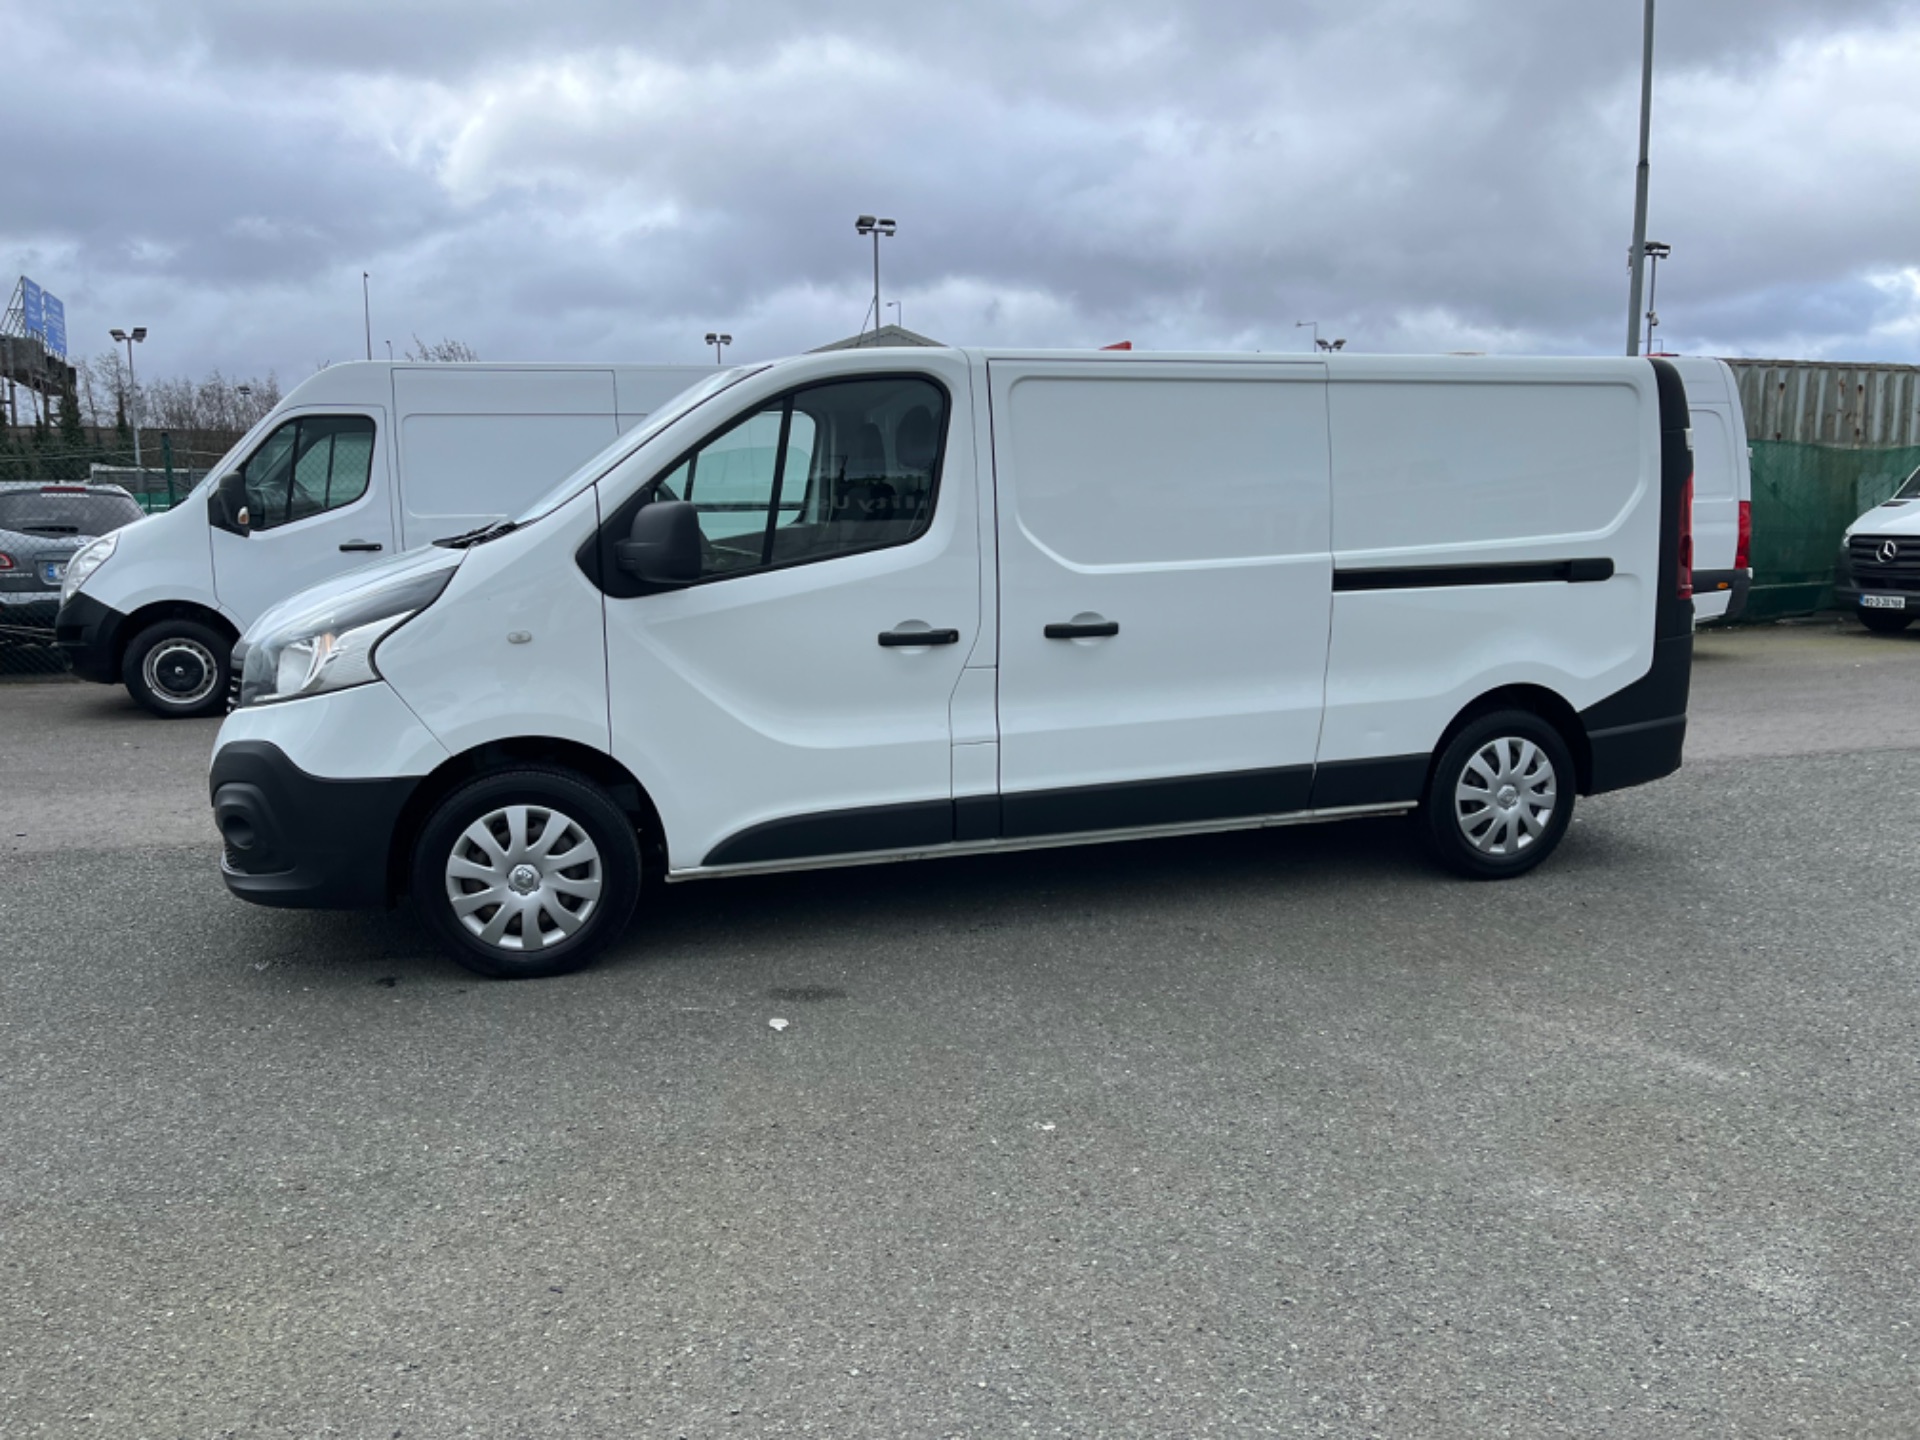 2019 Renault Trafic LL29 DCI 120 Business (191D31629) Thumbnail 4